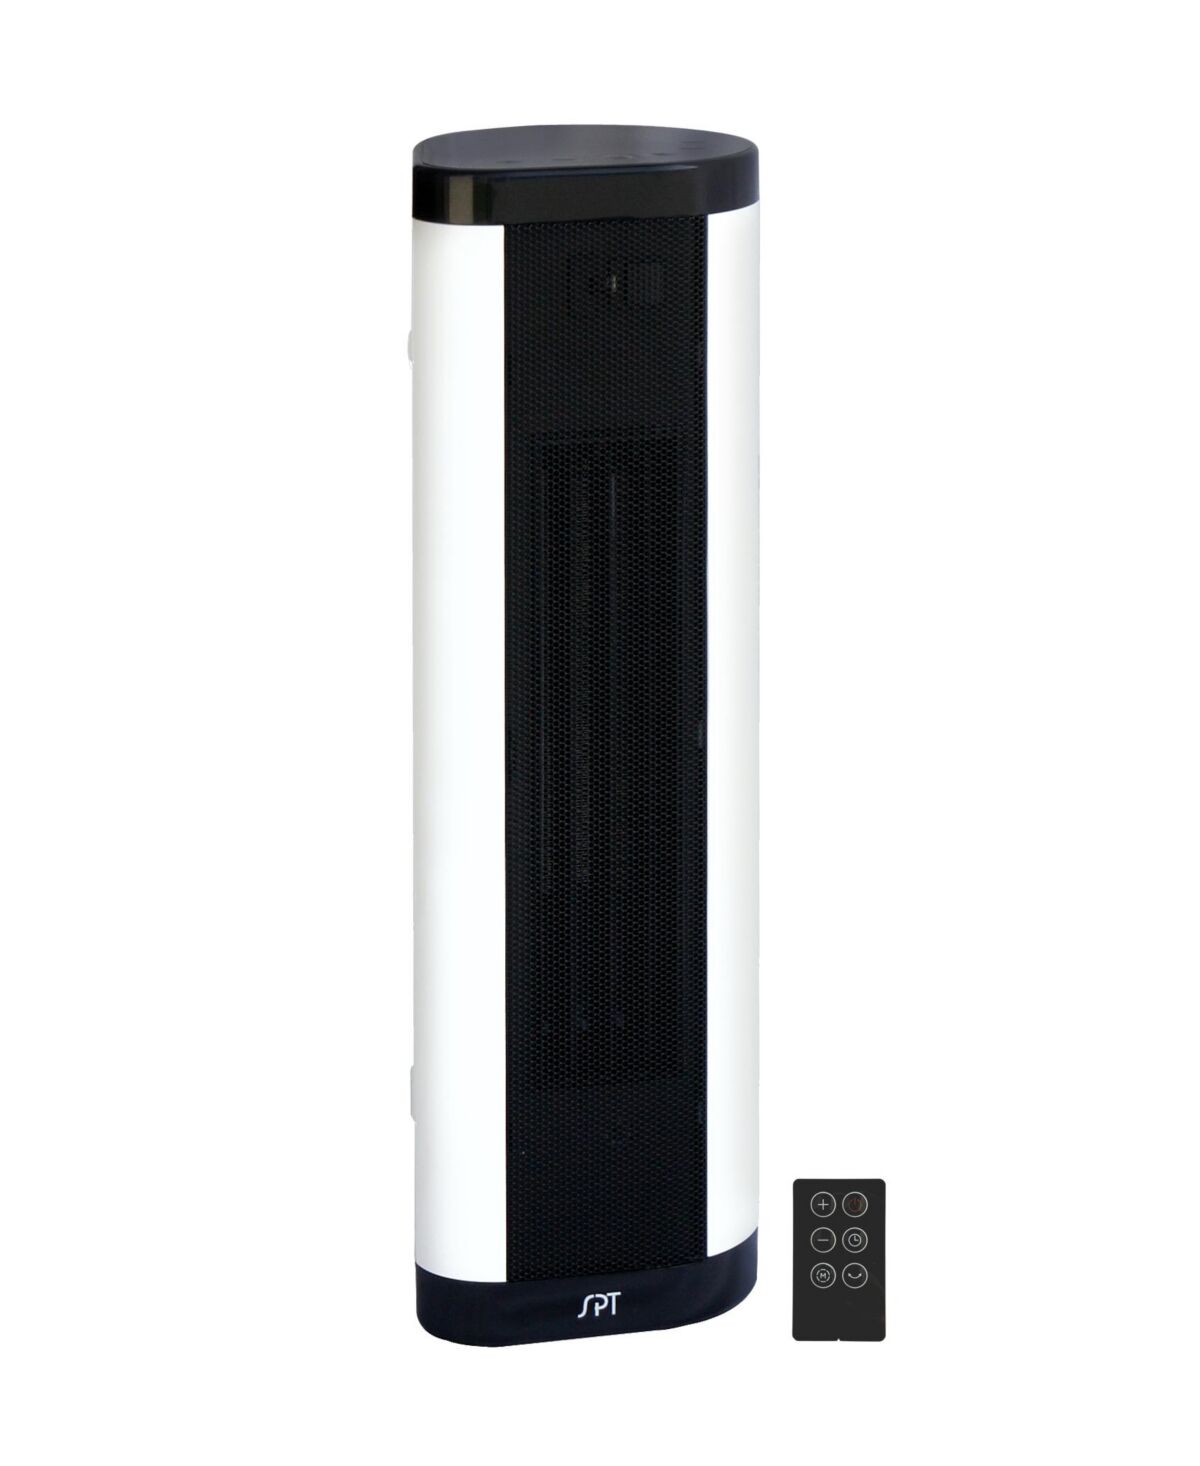 Spt Appliance Inc. Ptc Fan Tower/Baseboard Style Heater with Remote - Black And White